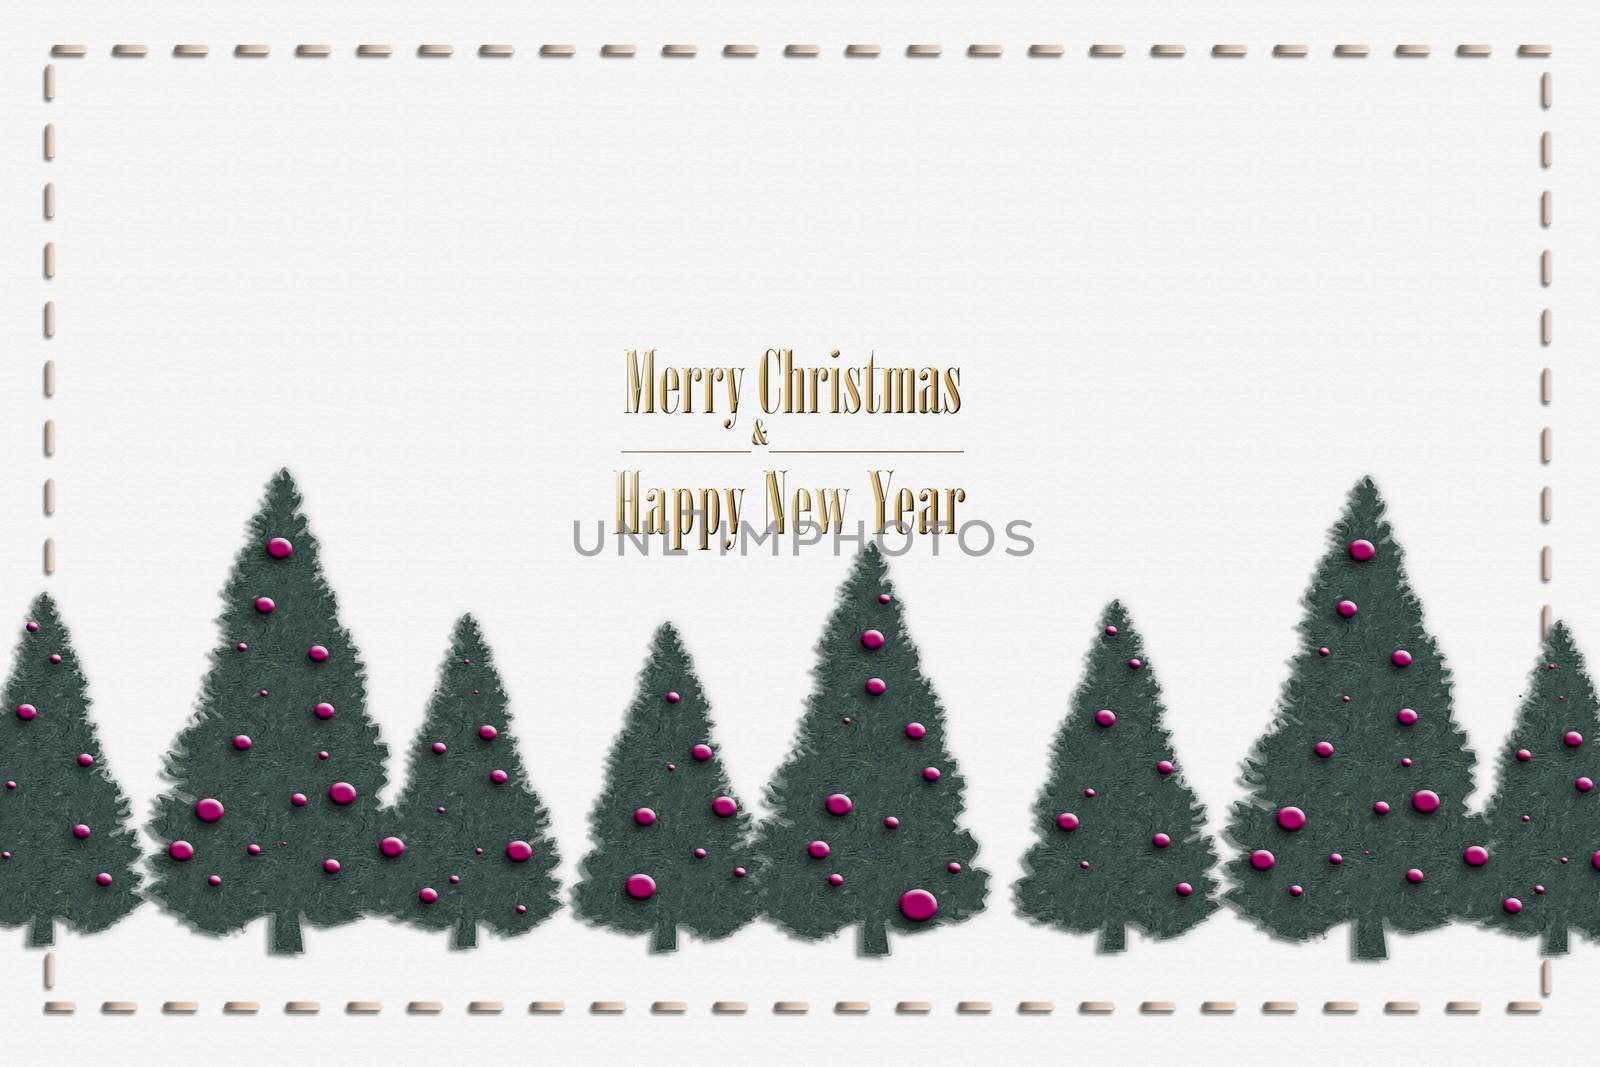 Elegant stylish Christmas card on white background with tree, gold text Merry Christmas and Happy New Year. Minimalist template design for greeting cards, banner, marketing. 3D illustration